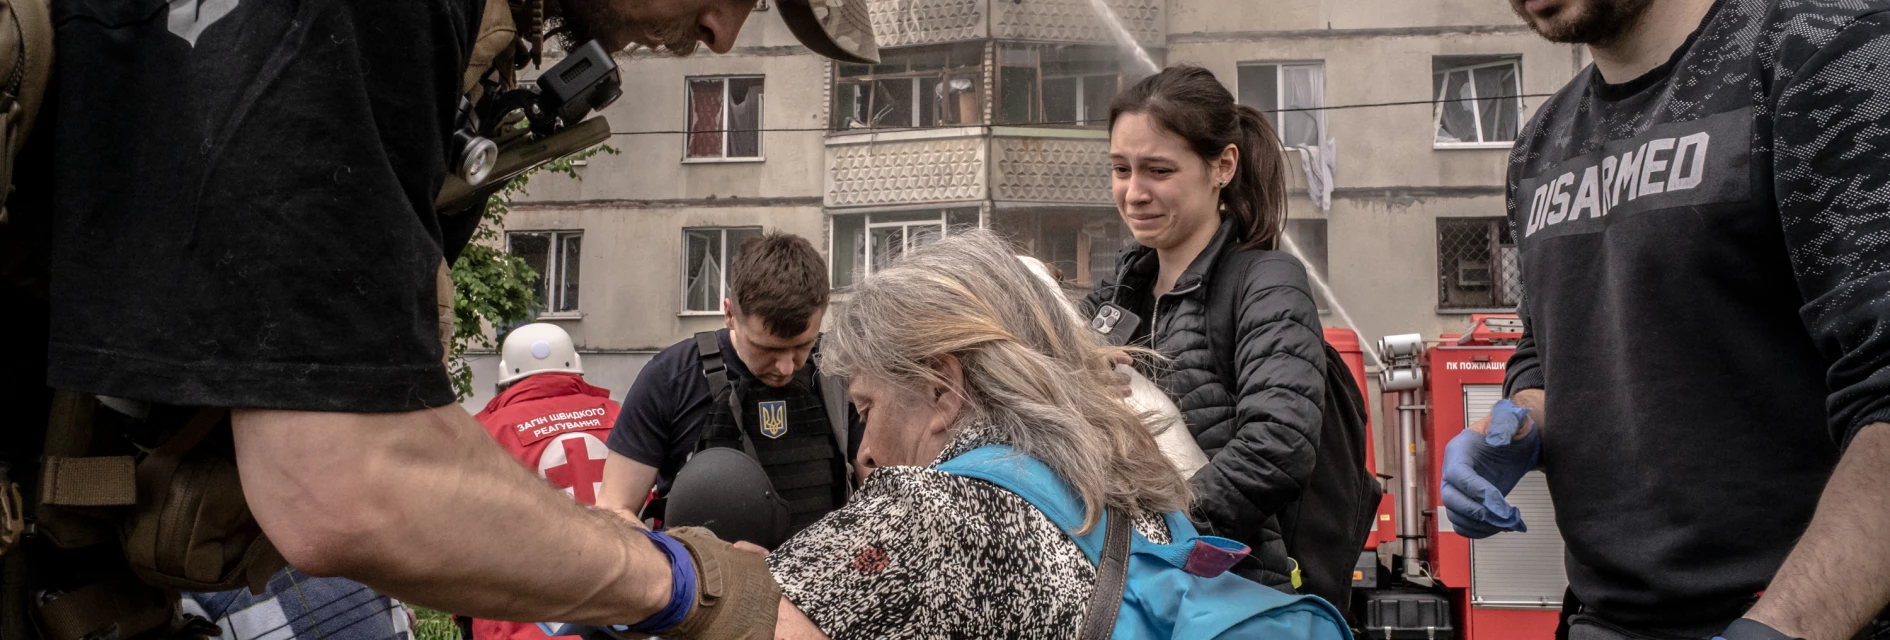 The pain and resilience of Kharkiv residents